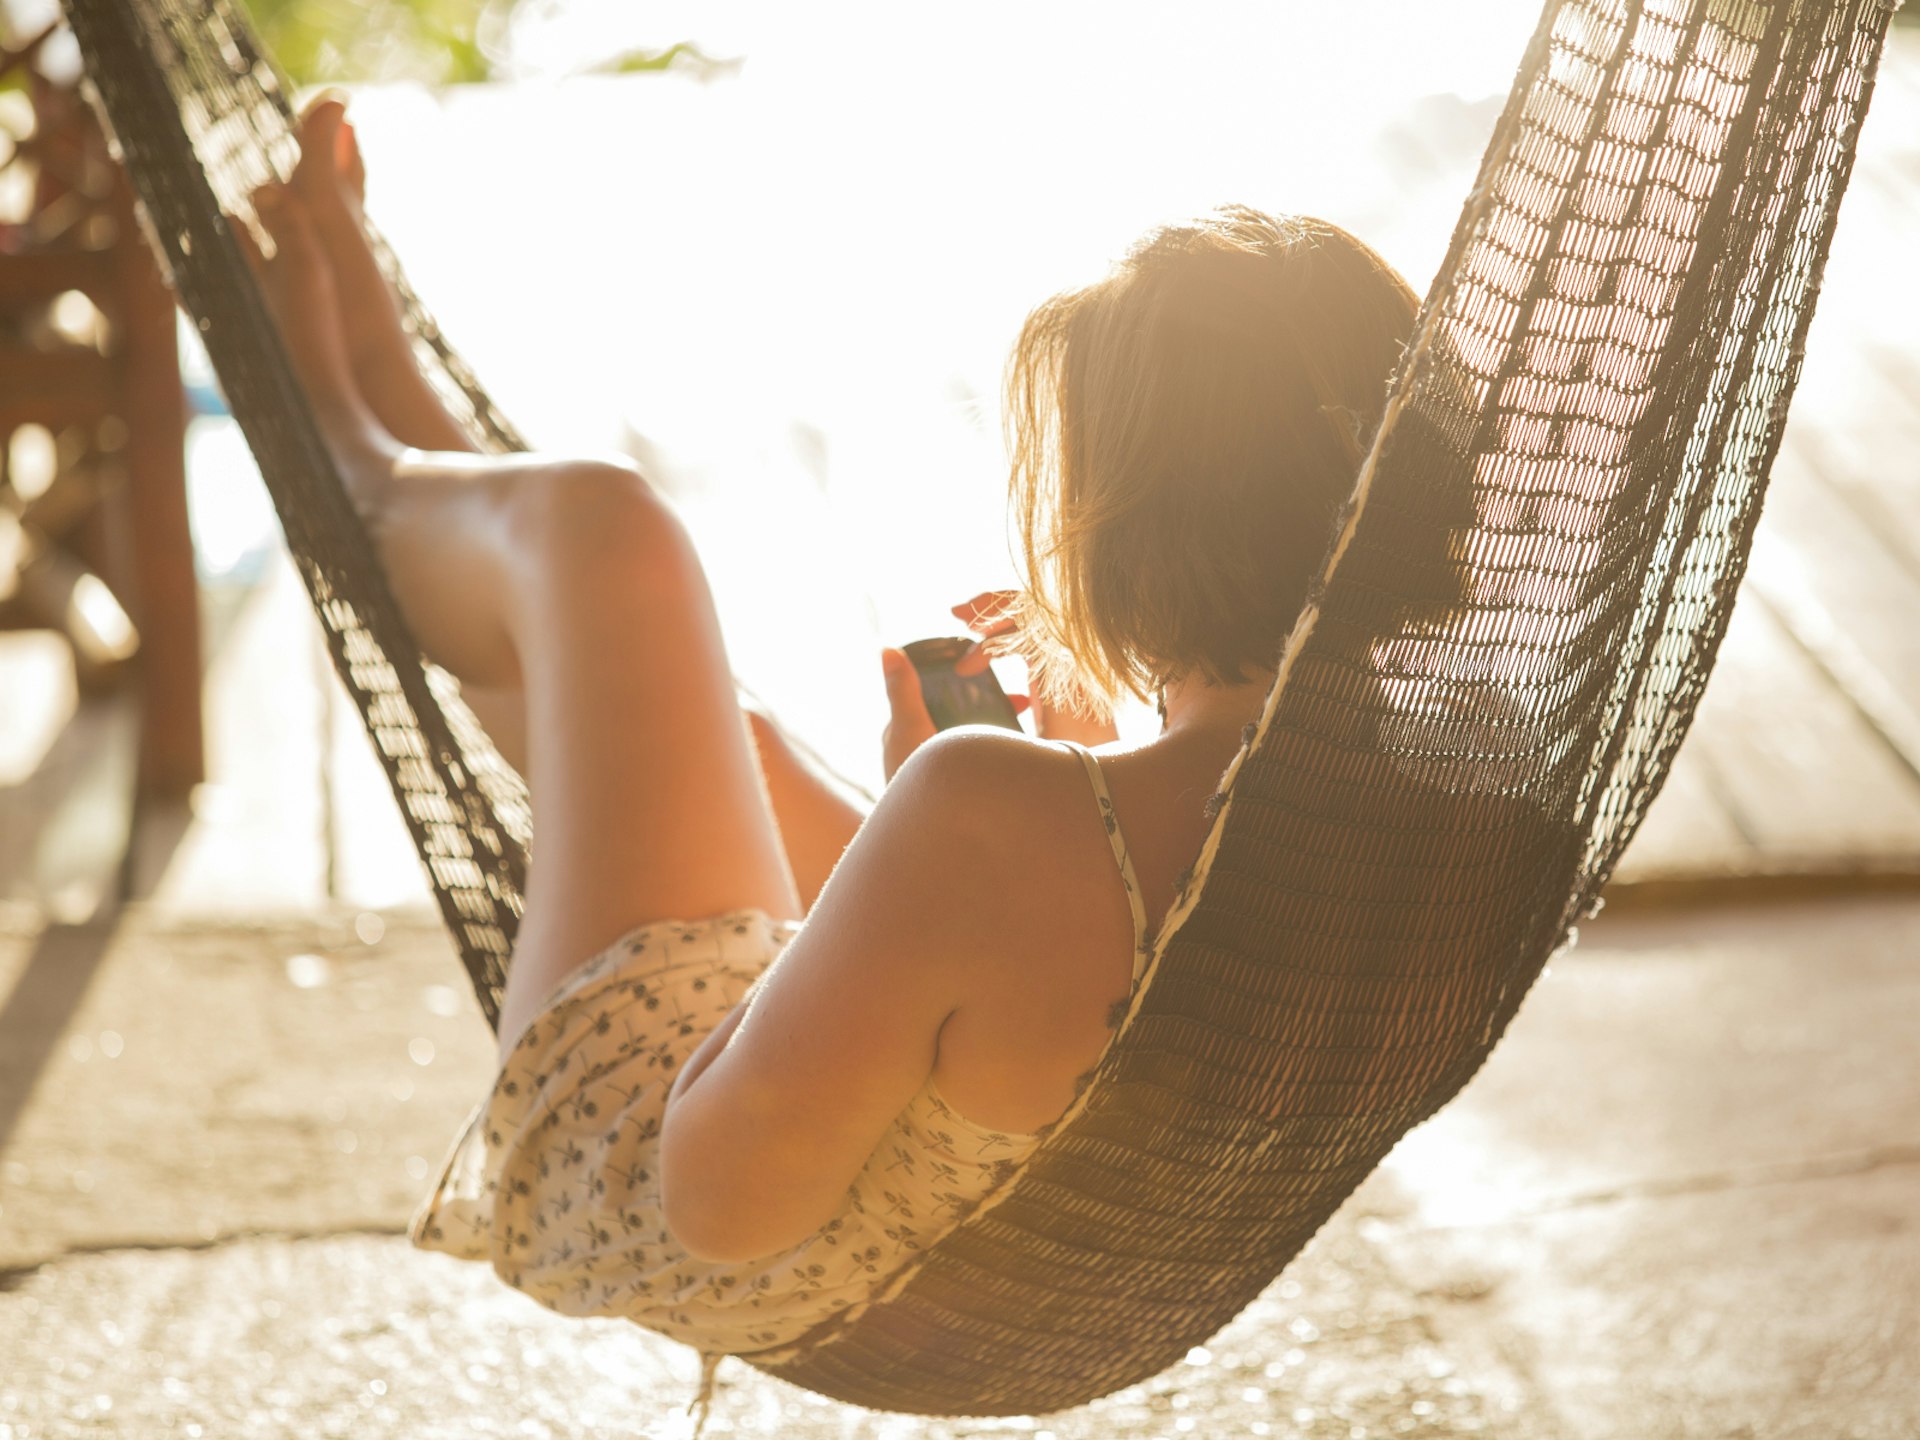 A woman relaxing in a hammock on her phone